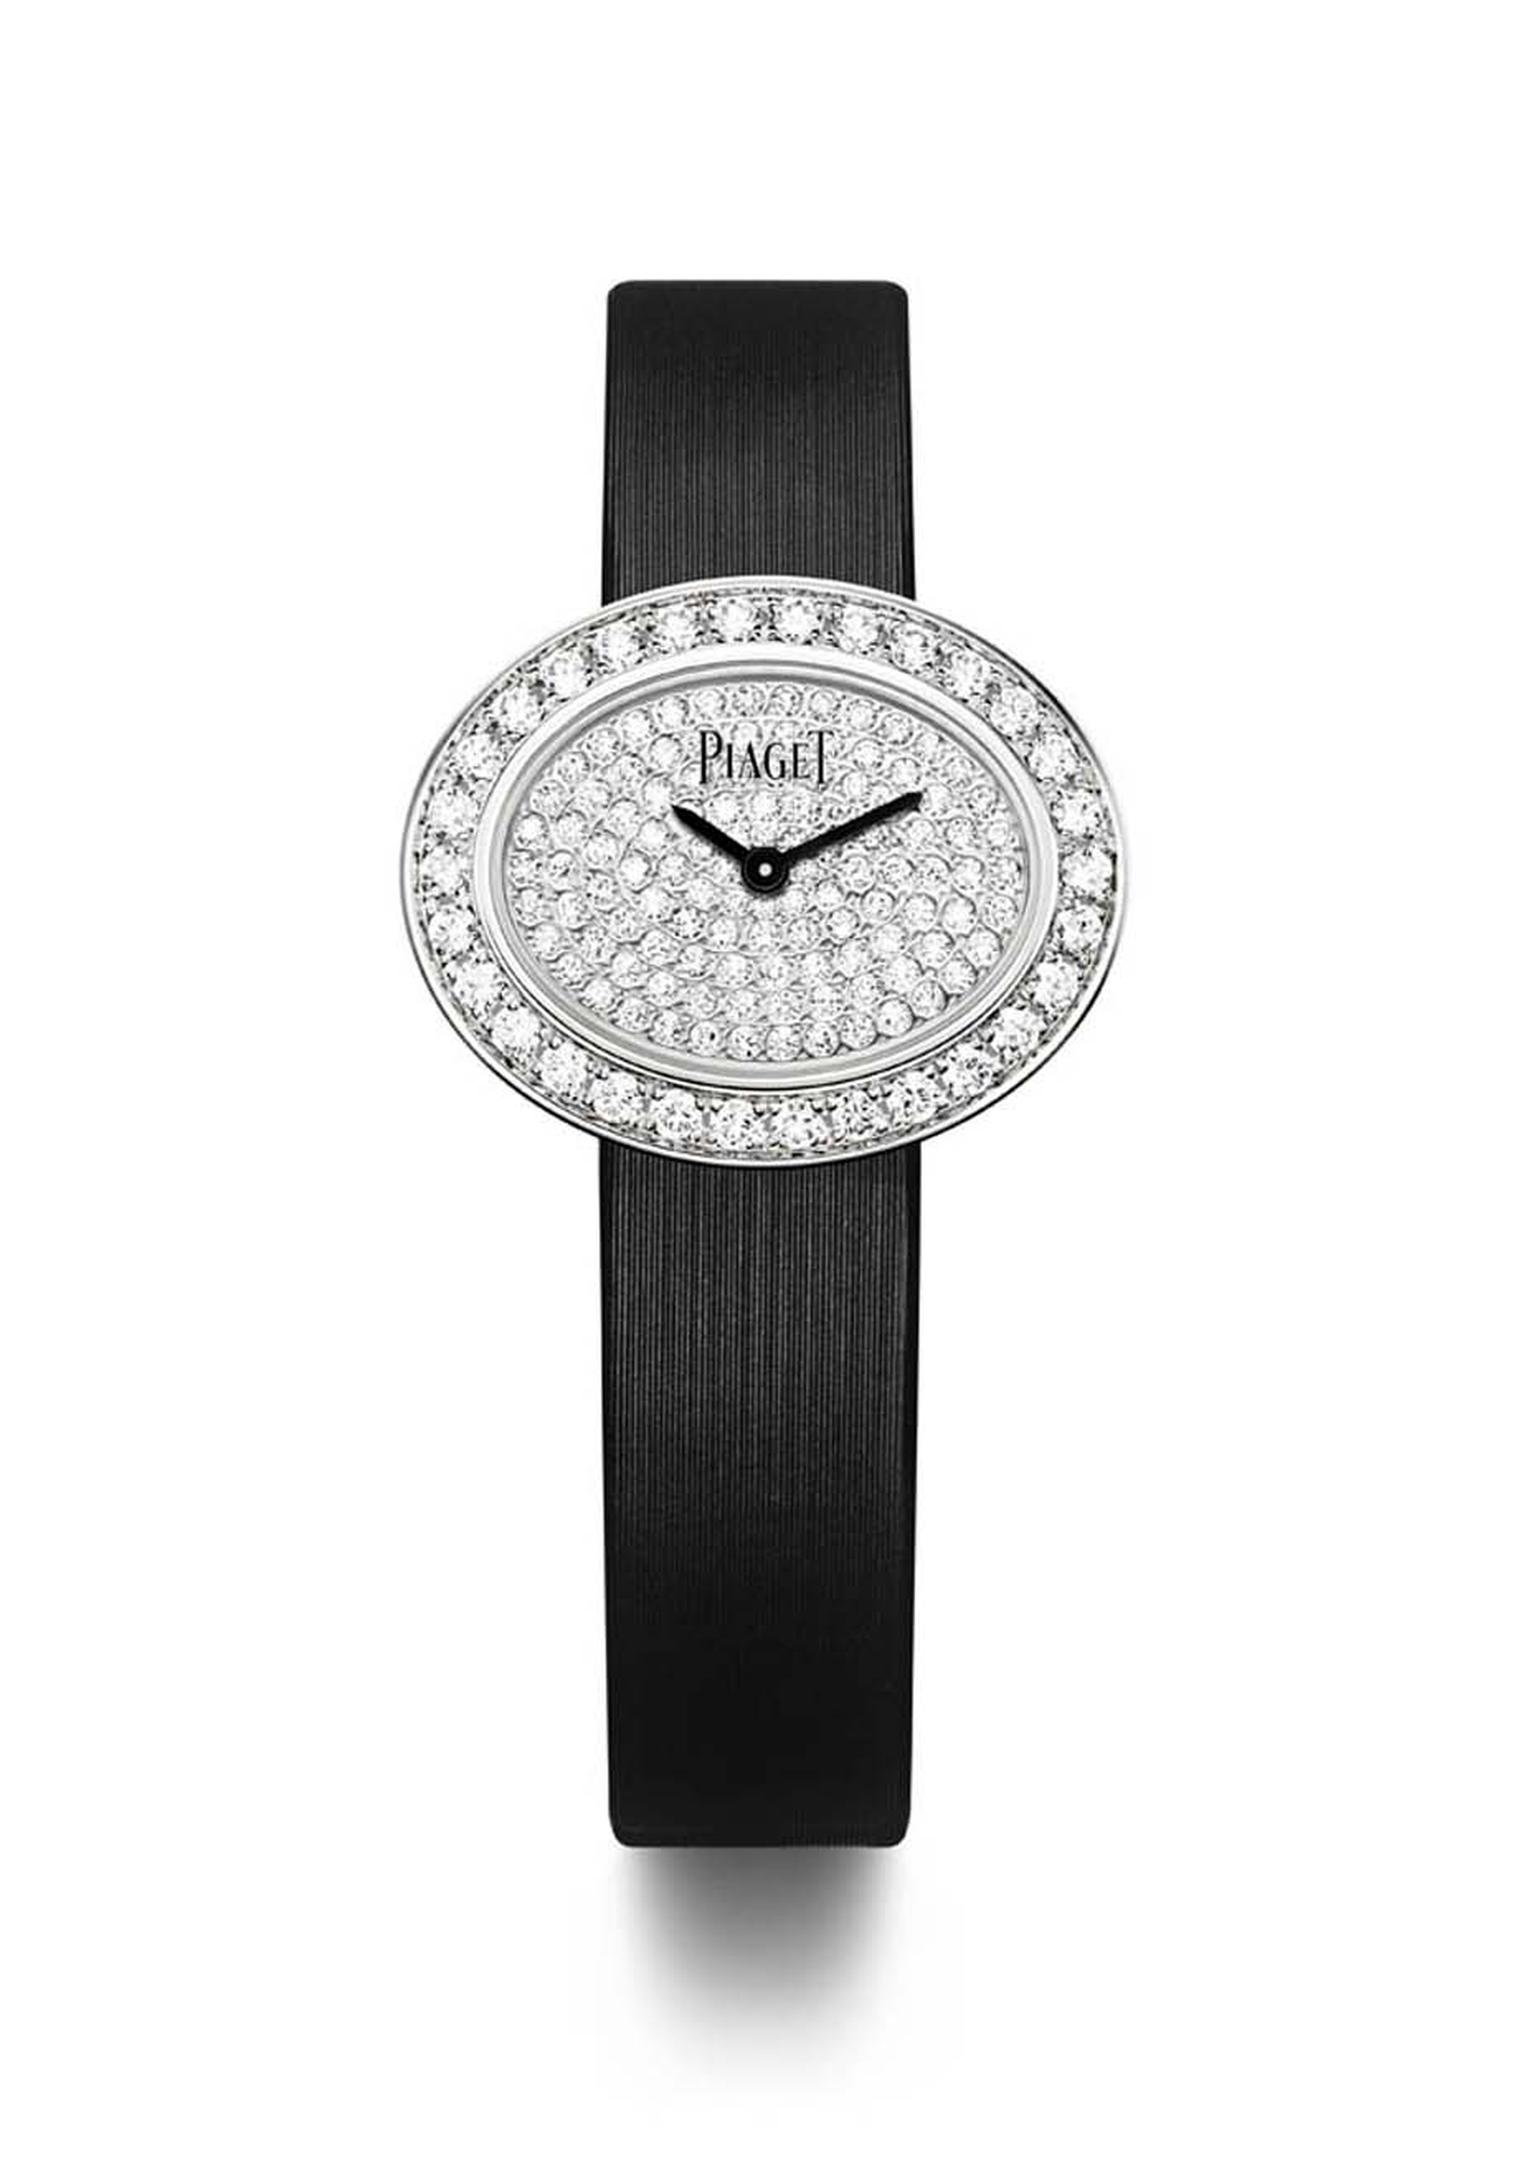 Piaget Limelight Diamonds watch in white gold with an oval-shaped case and black lacquer dial, set with 1.00ct diamonds on the bezel and a further 0.60ct on the dial, presented on a black satin strap with an ardillon buckle set with a single diamond.